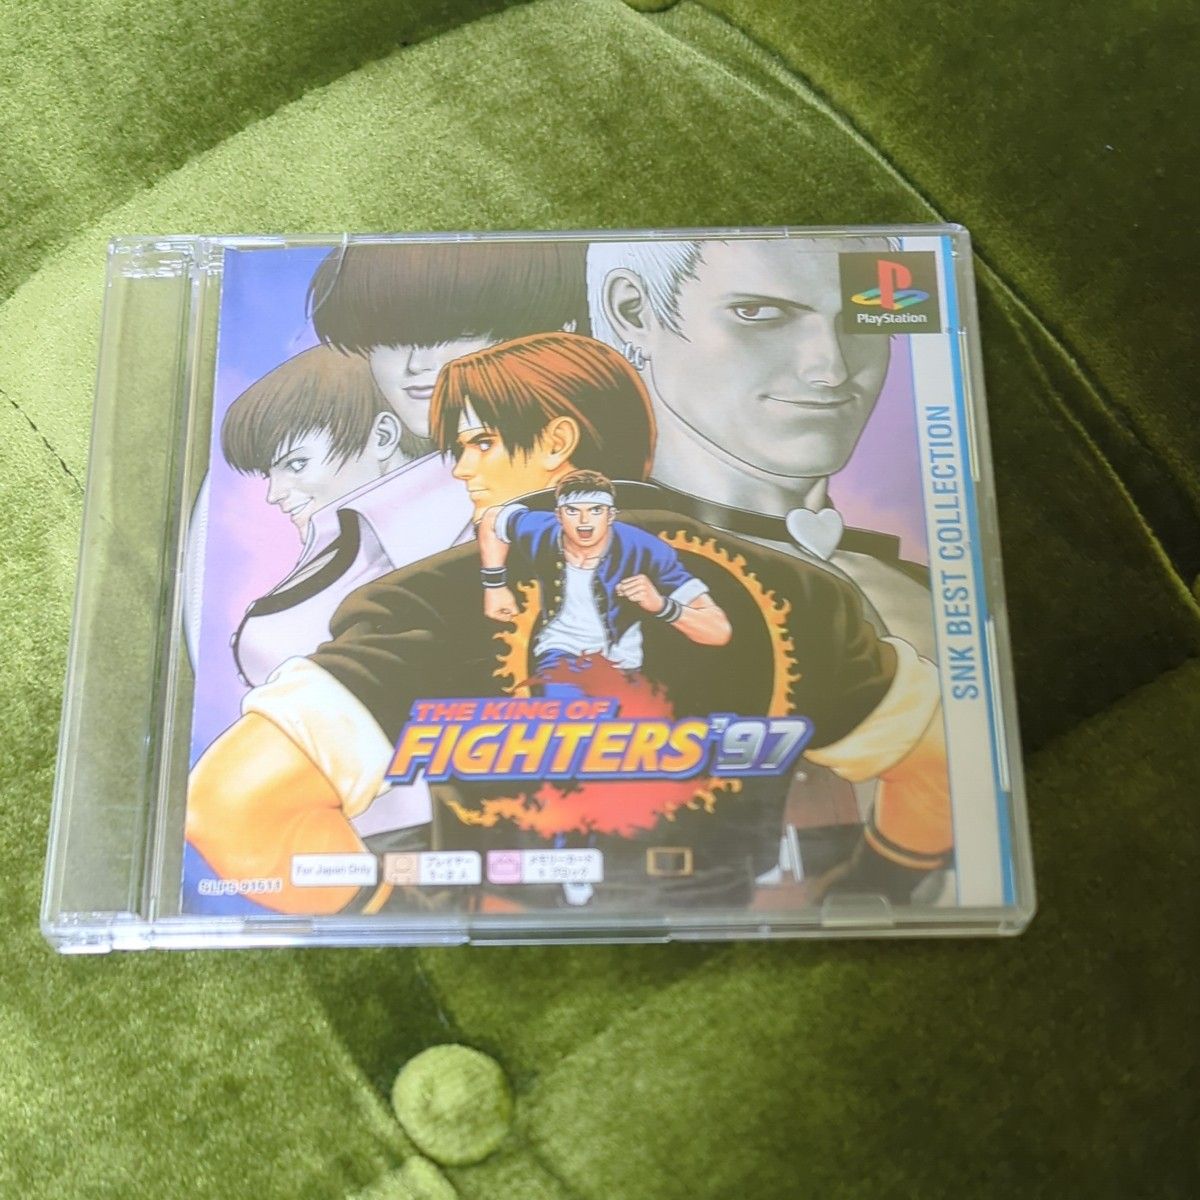 【PS】 ザ キングオブファイターズ97 PlayStation  プレステ  the king of fighters 